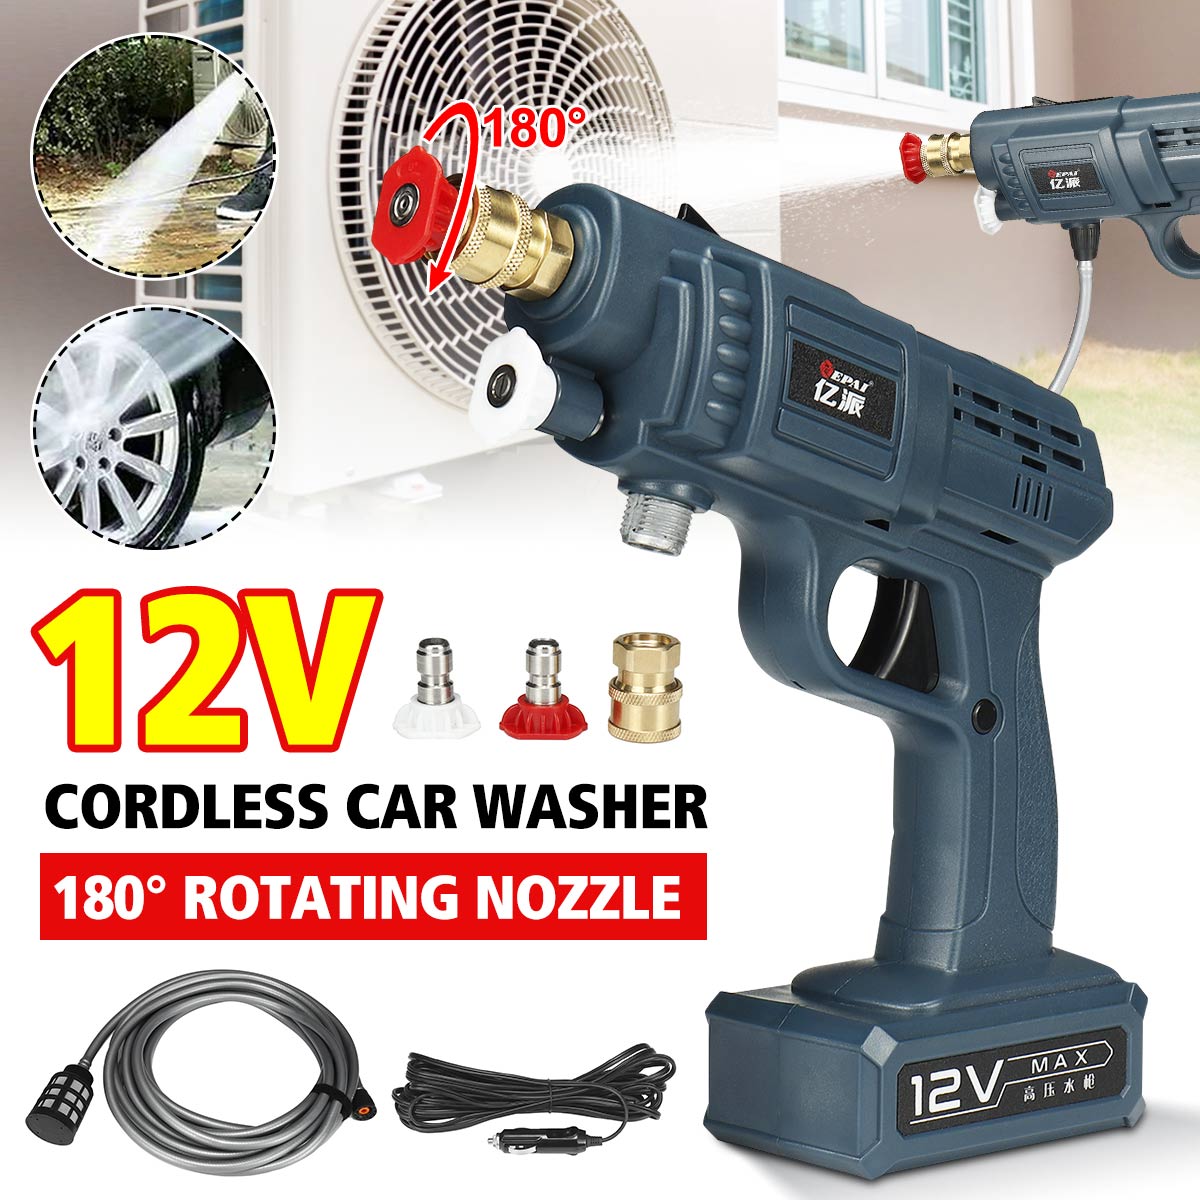 12V-High-Pressure-Washer-Wireless-Car-Washing-Guns-Machine-Garden-Cleaning-Jet-Tool-Without-Battery-1834465-1